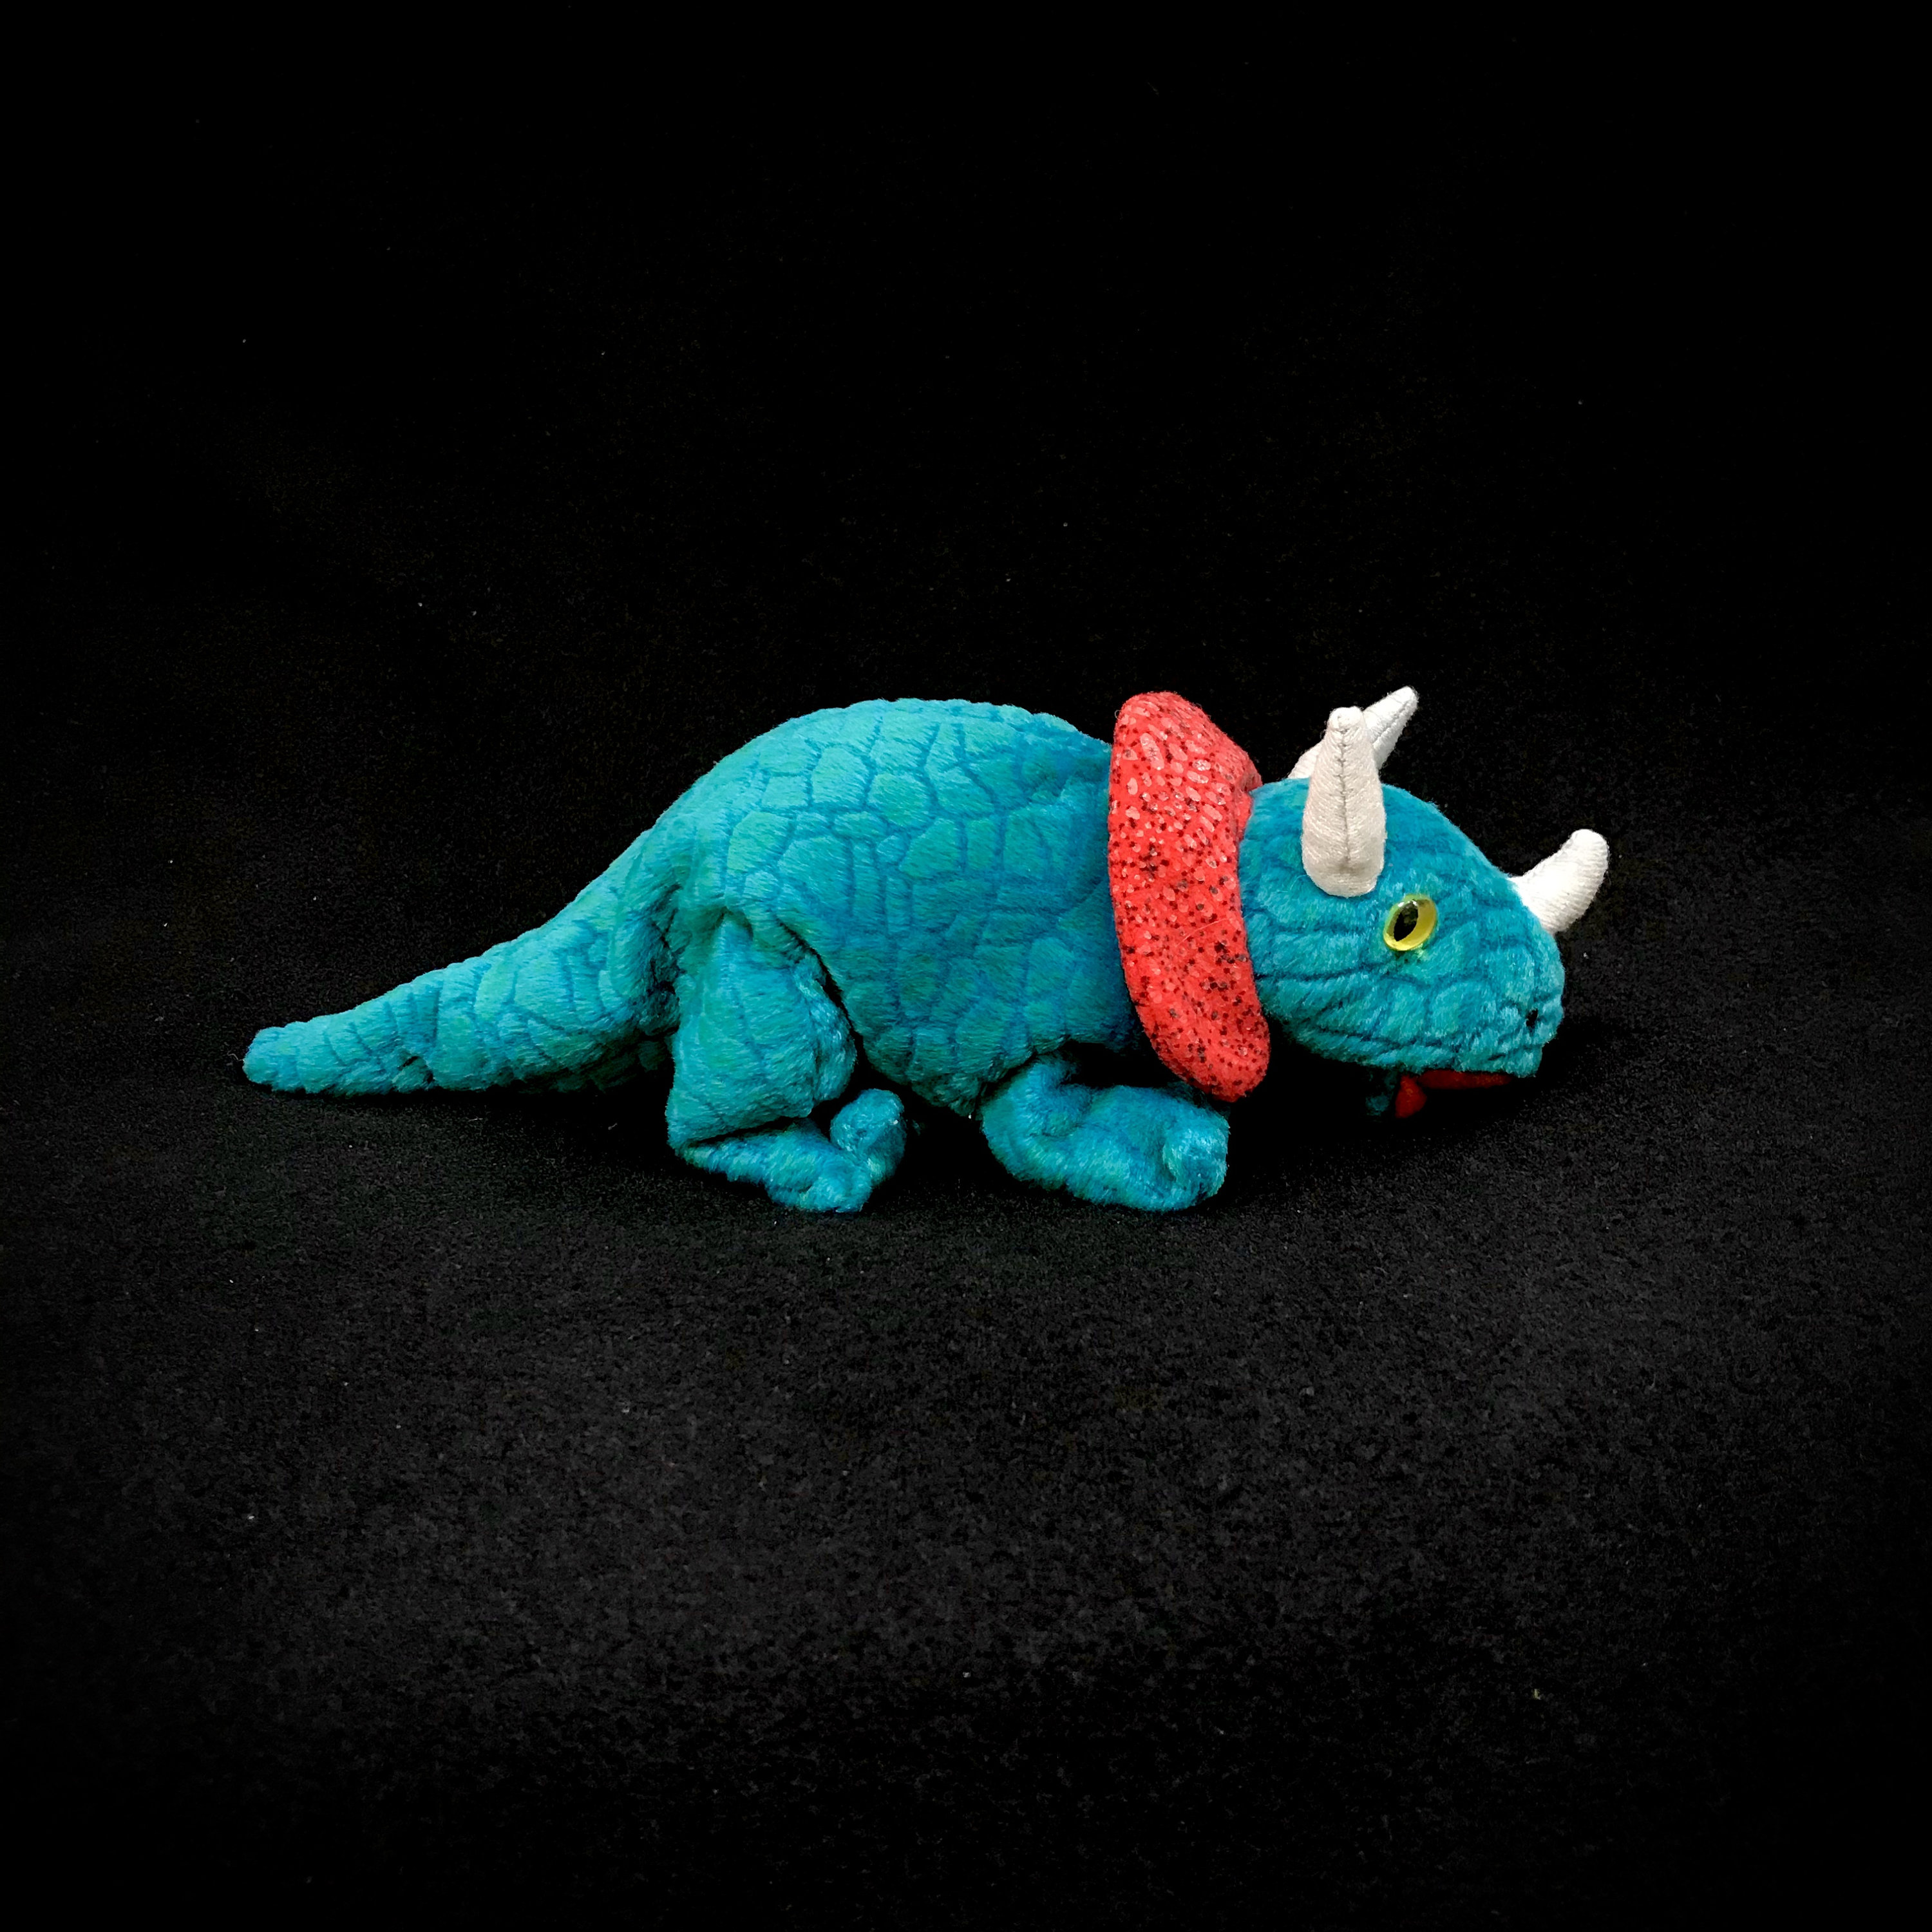 Details about   TY HORNSLY THE TRICERATOPS BEANIE BABY RETIRED 2000 NEW STUFFED ANIMAL TOY! 